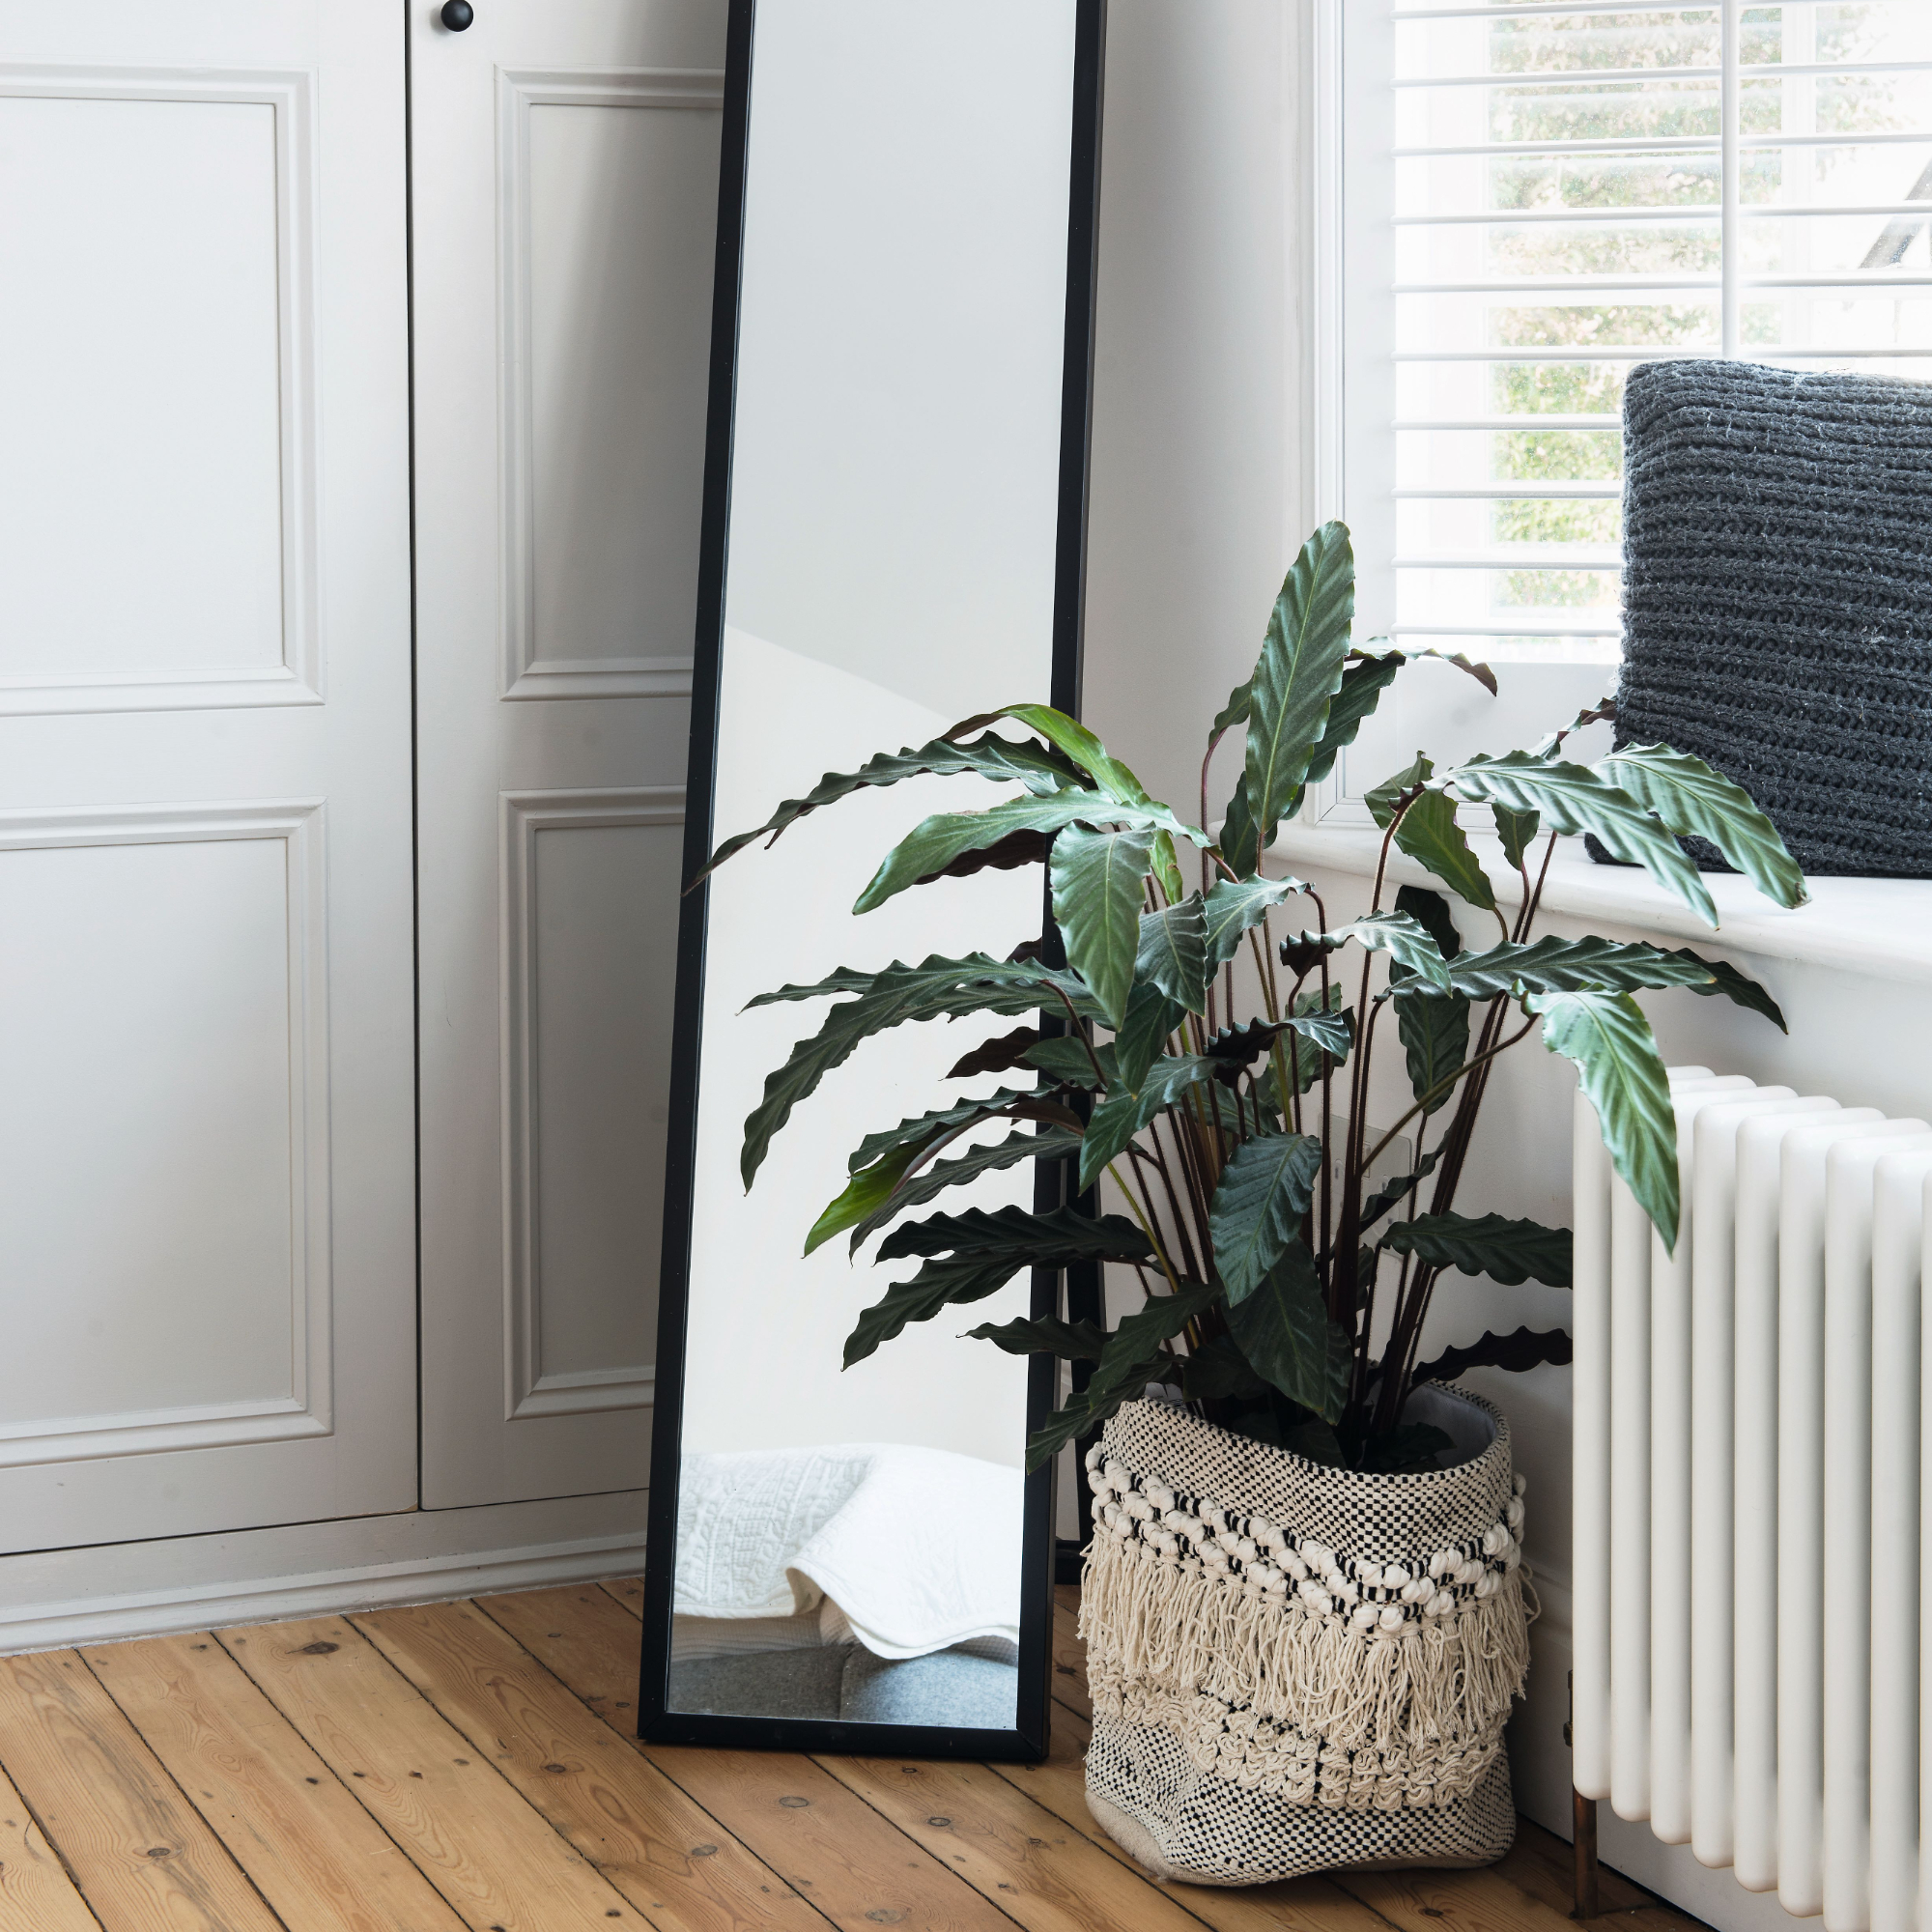 Standing mirror on a wooden floor beside pale grey built in wardrobe and window with venetian blinds